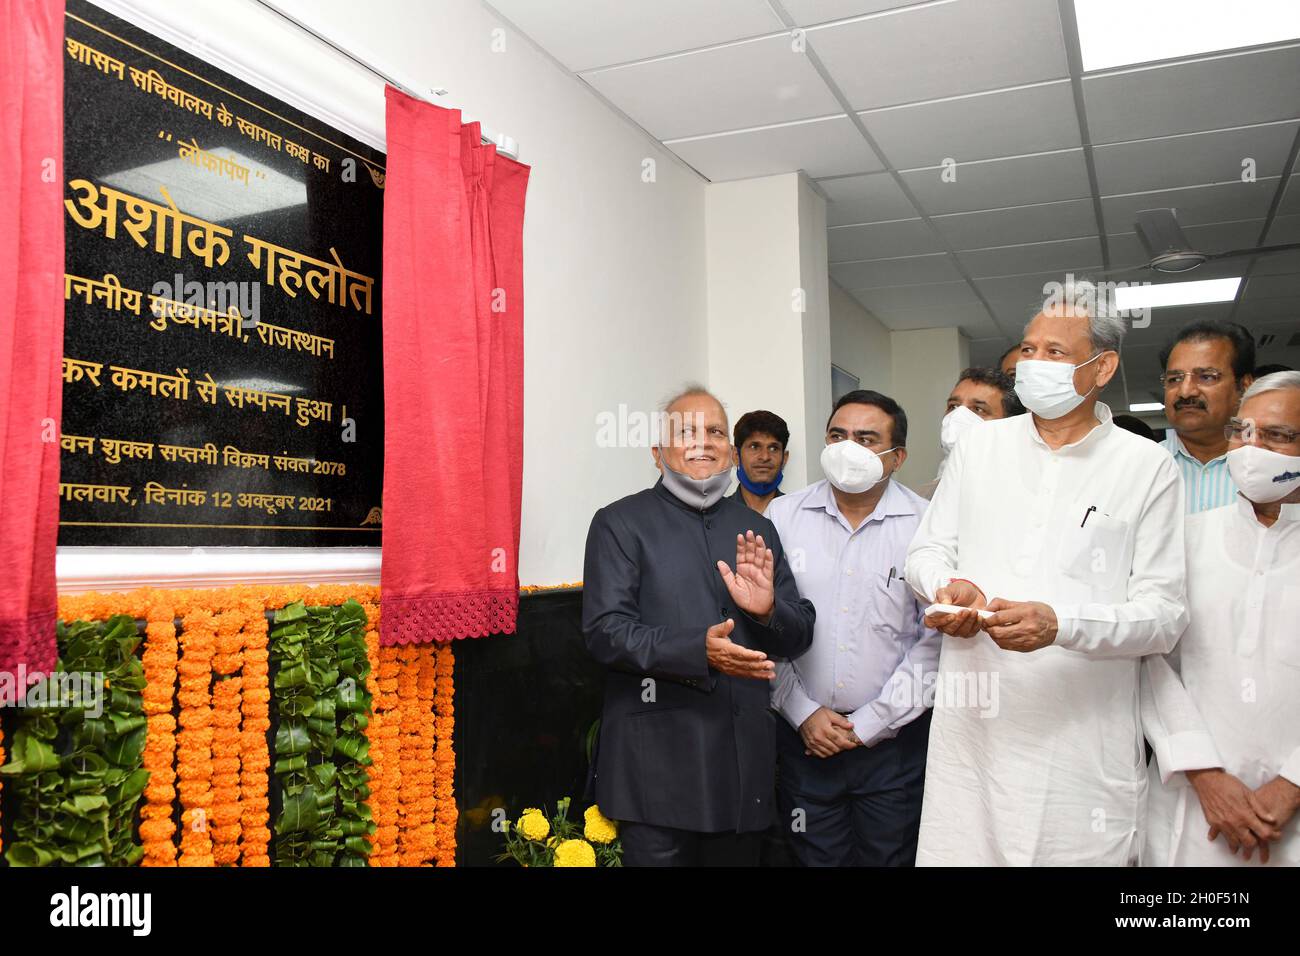 Jaipur, India, October 12, 2021: Rajasthan Chief Minister Ashok Gehlot inaugurates reception hall at secretariat complex in Jaipur. The hall has been built at a cost of Rs 3.12 crore. The fully air-conditioned hall has a seating capacity of 150 visitors. A separate convenient room has also been made for baby feeding. Assembly Speaker CP Joshi, Transport Minister Pratap Singh Khachariyawas and Chief Secretary Niranjan Arya were also present. Credit: Sumit Saraswat/Alamy Live News Stock Photo